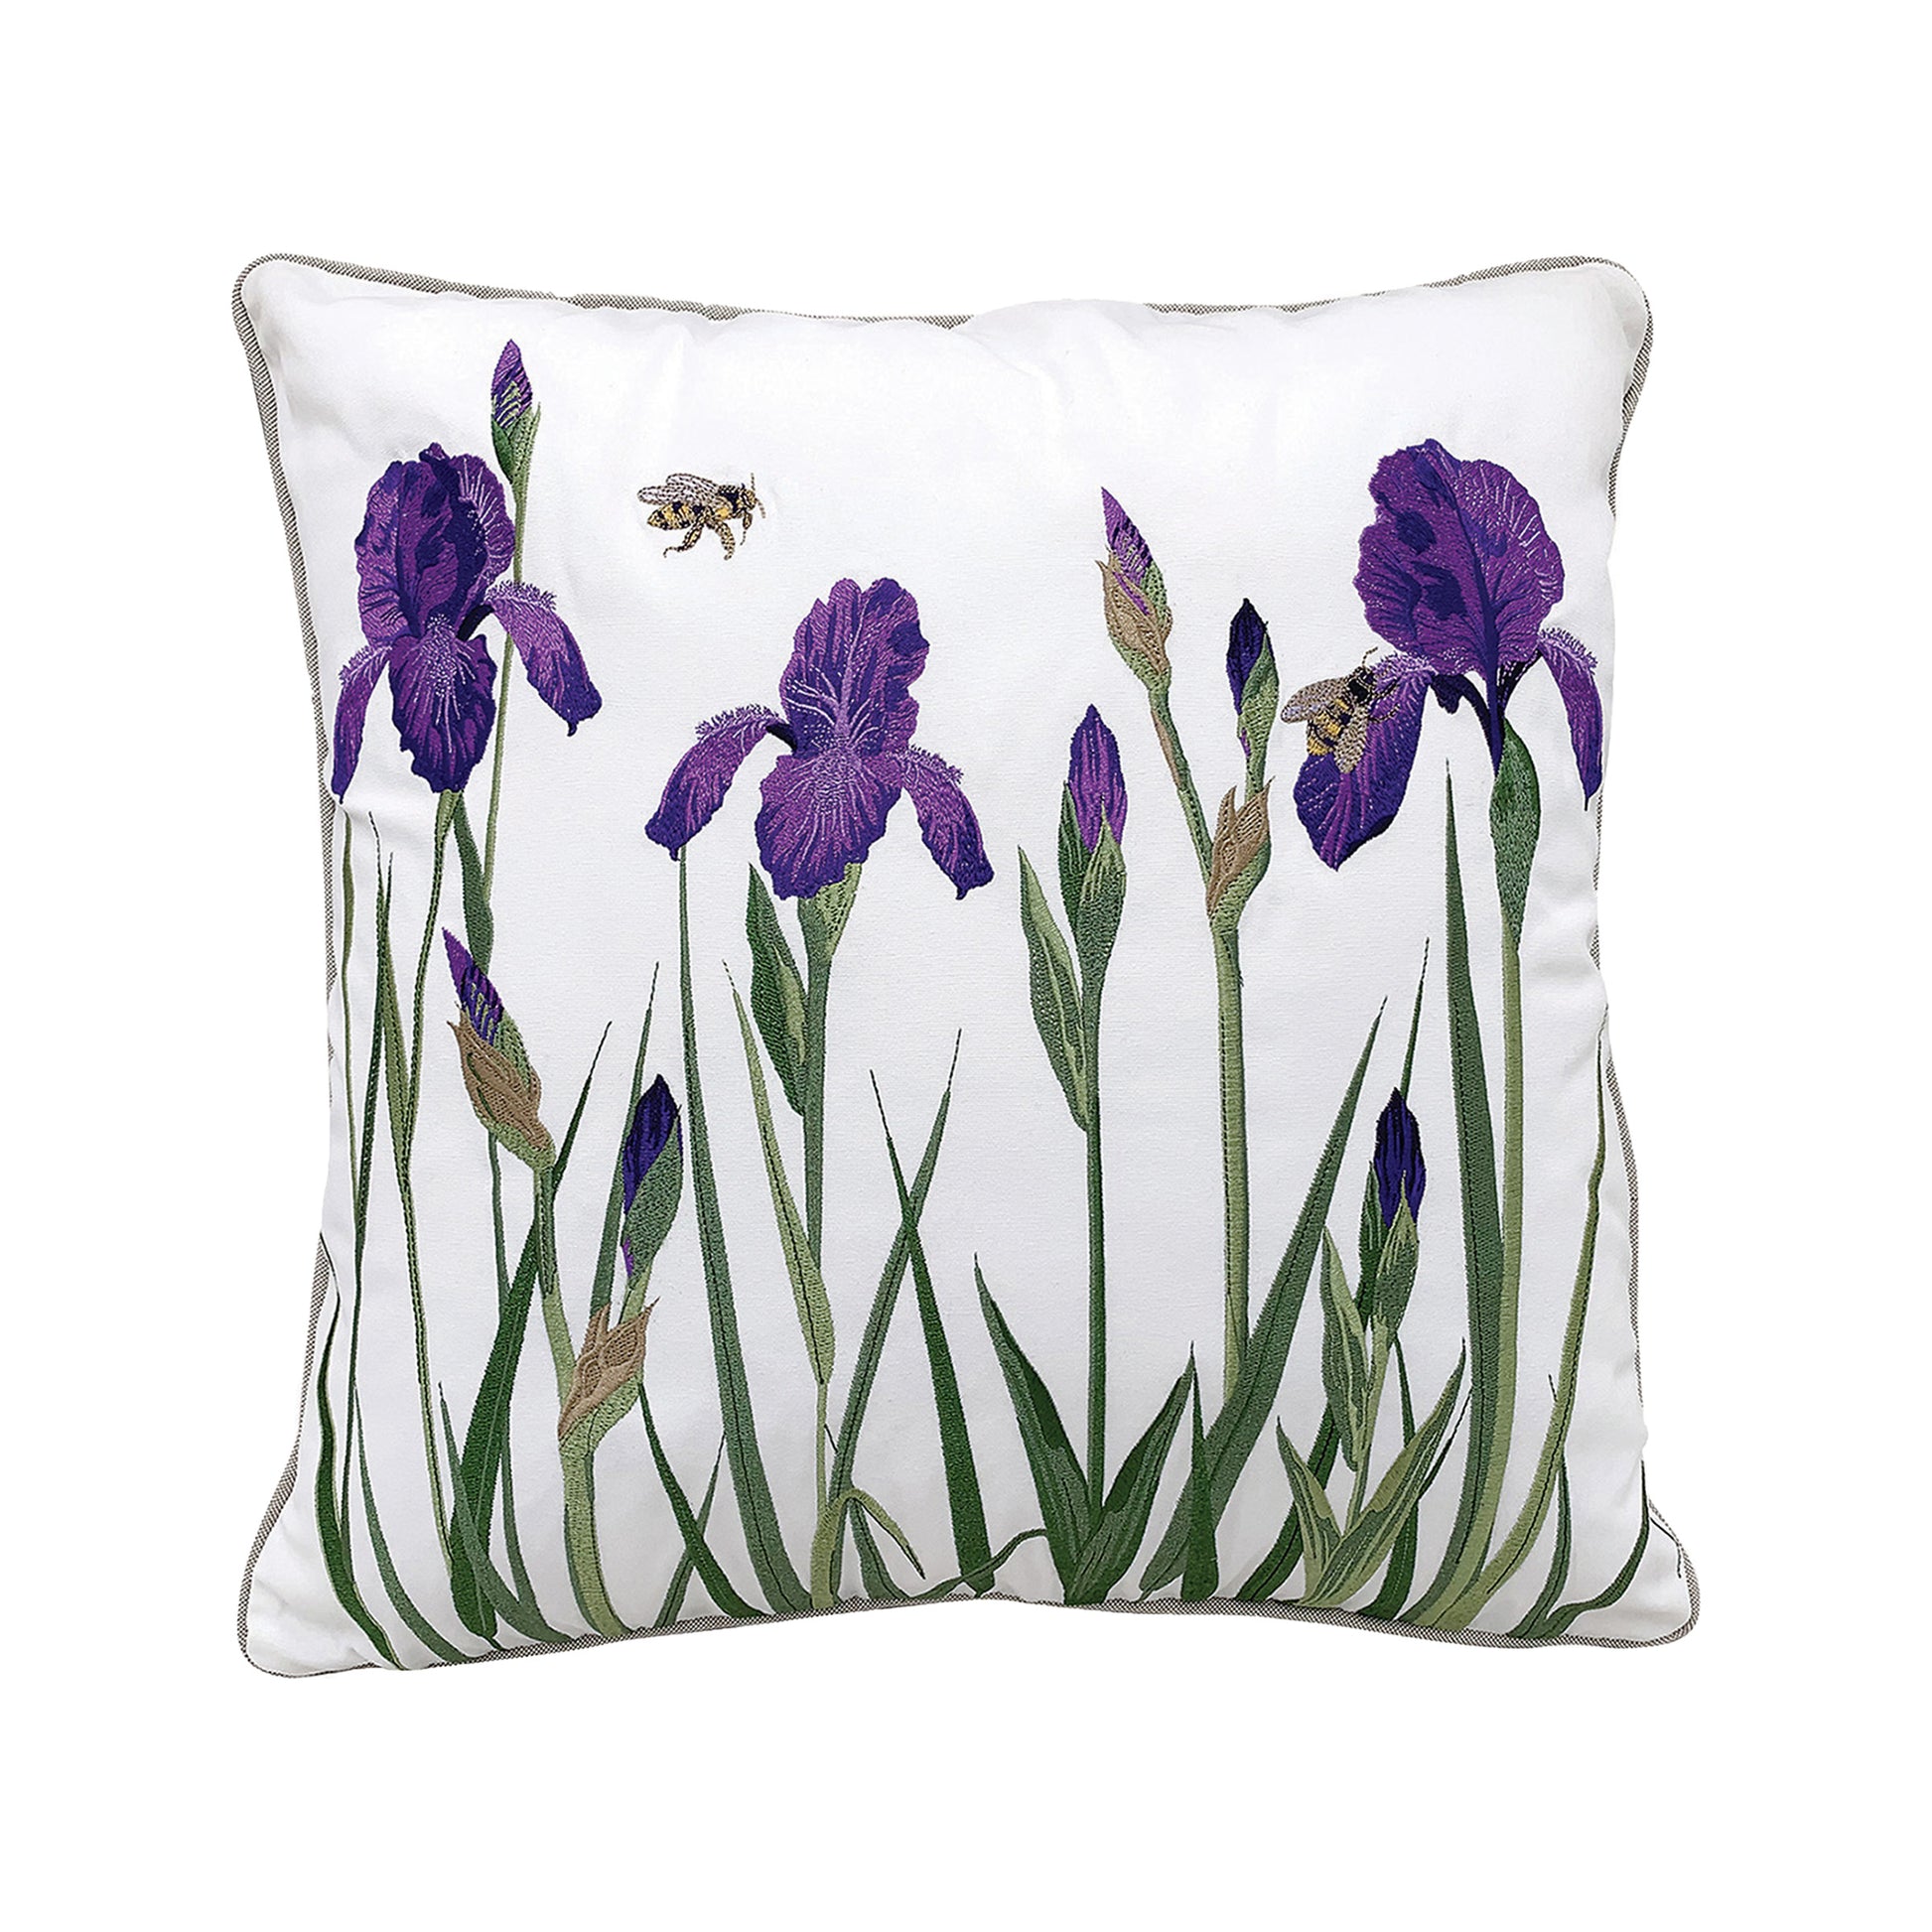 Embroidered bee's buzz through a garden of Iris flowers embroidered on a white background. Pillow is finished with grey piped edging.